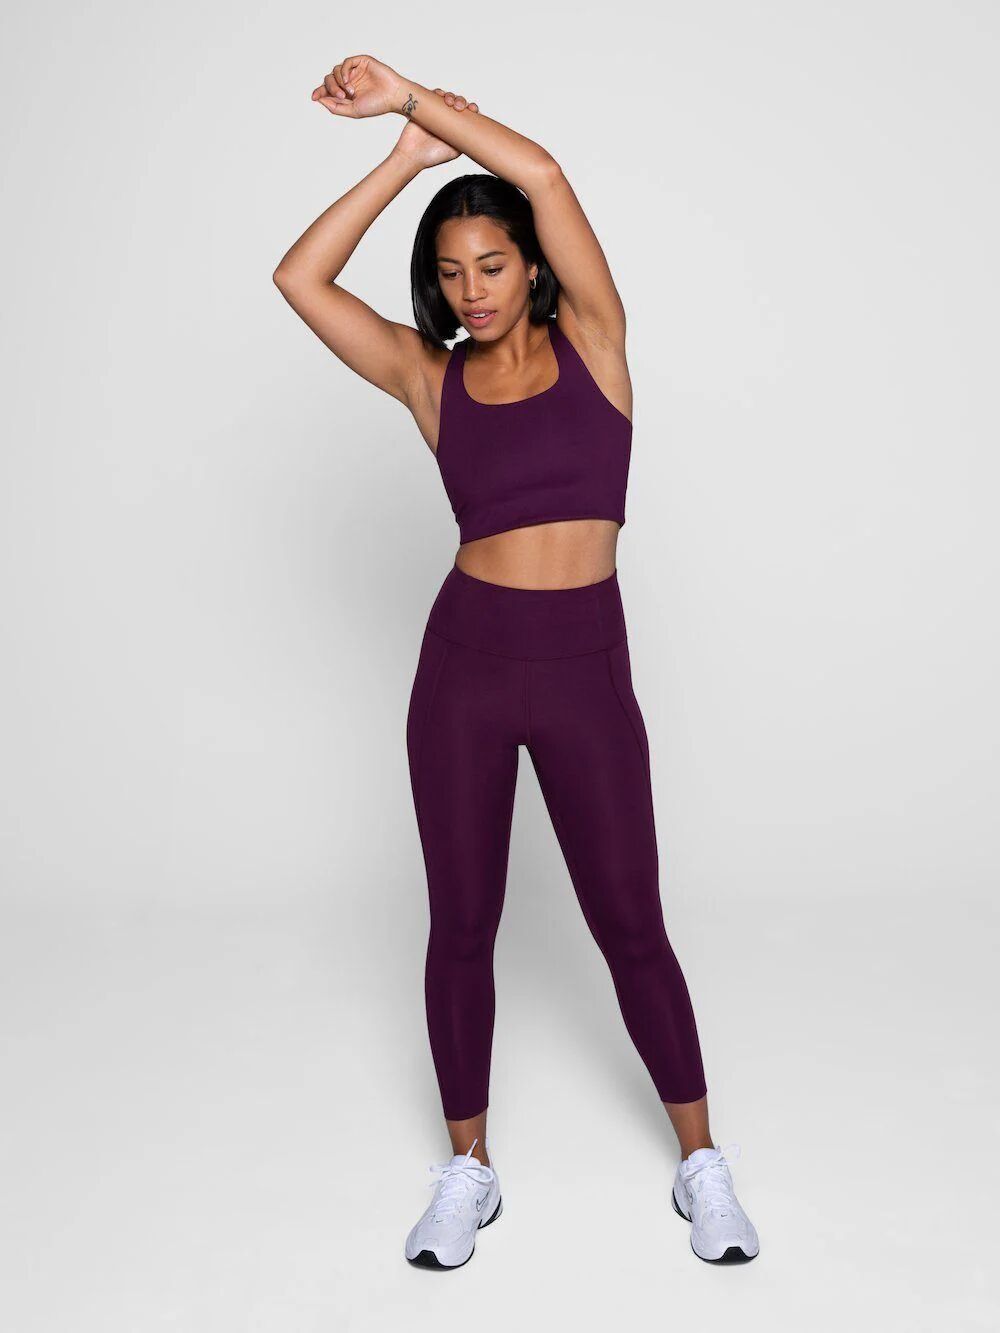 Girlfriend Collective Women's Compressive Legging - Made From Recycled Plastic Bottles, Plum / S / Normal